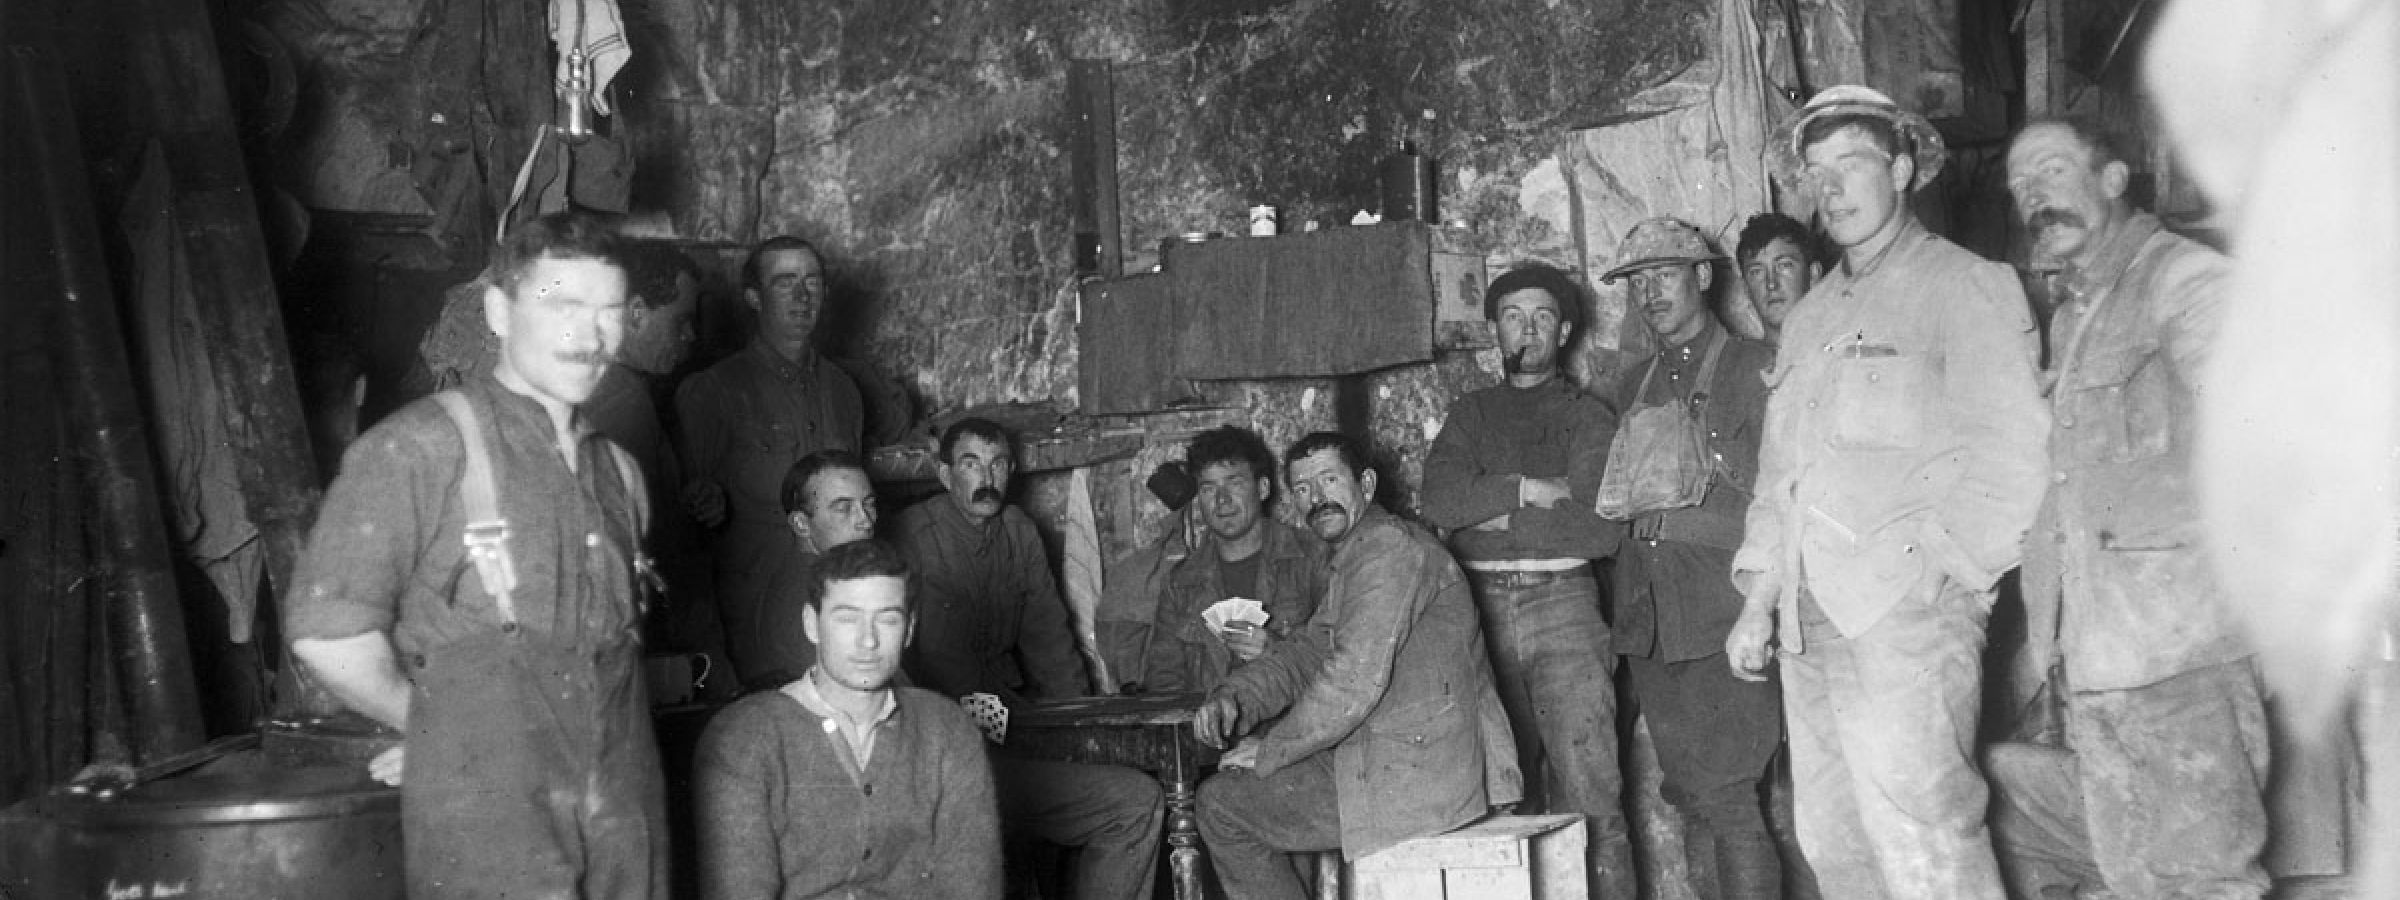 Men of the New Zealand Tunnelling Company below ground at La Fosse Farm, 5 December 1917.